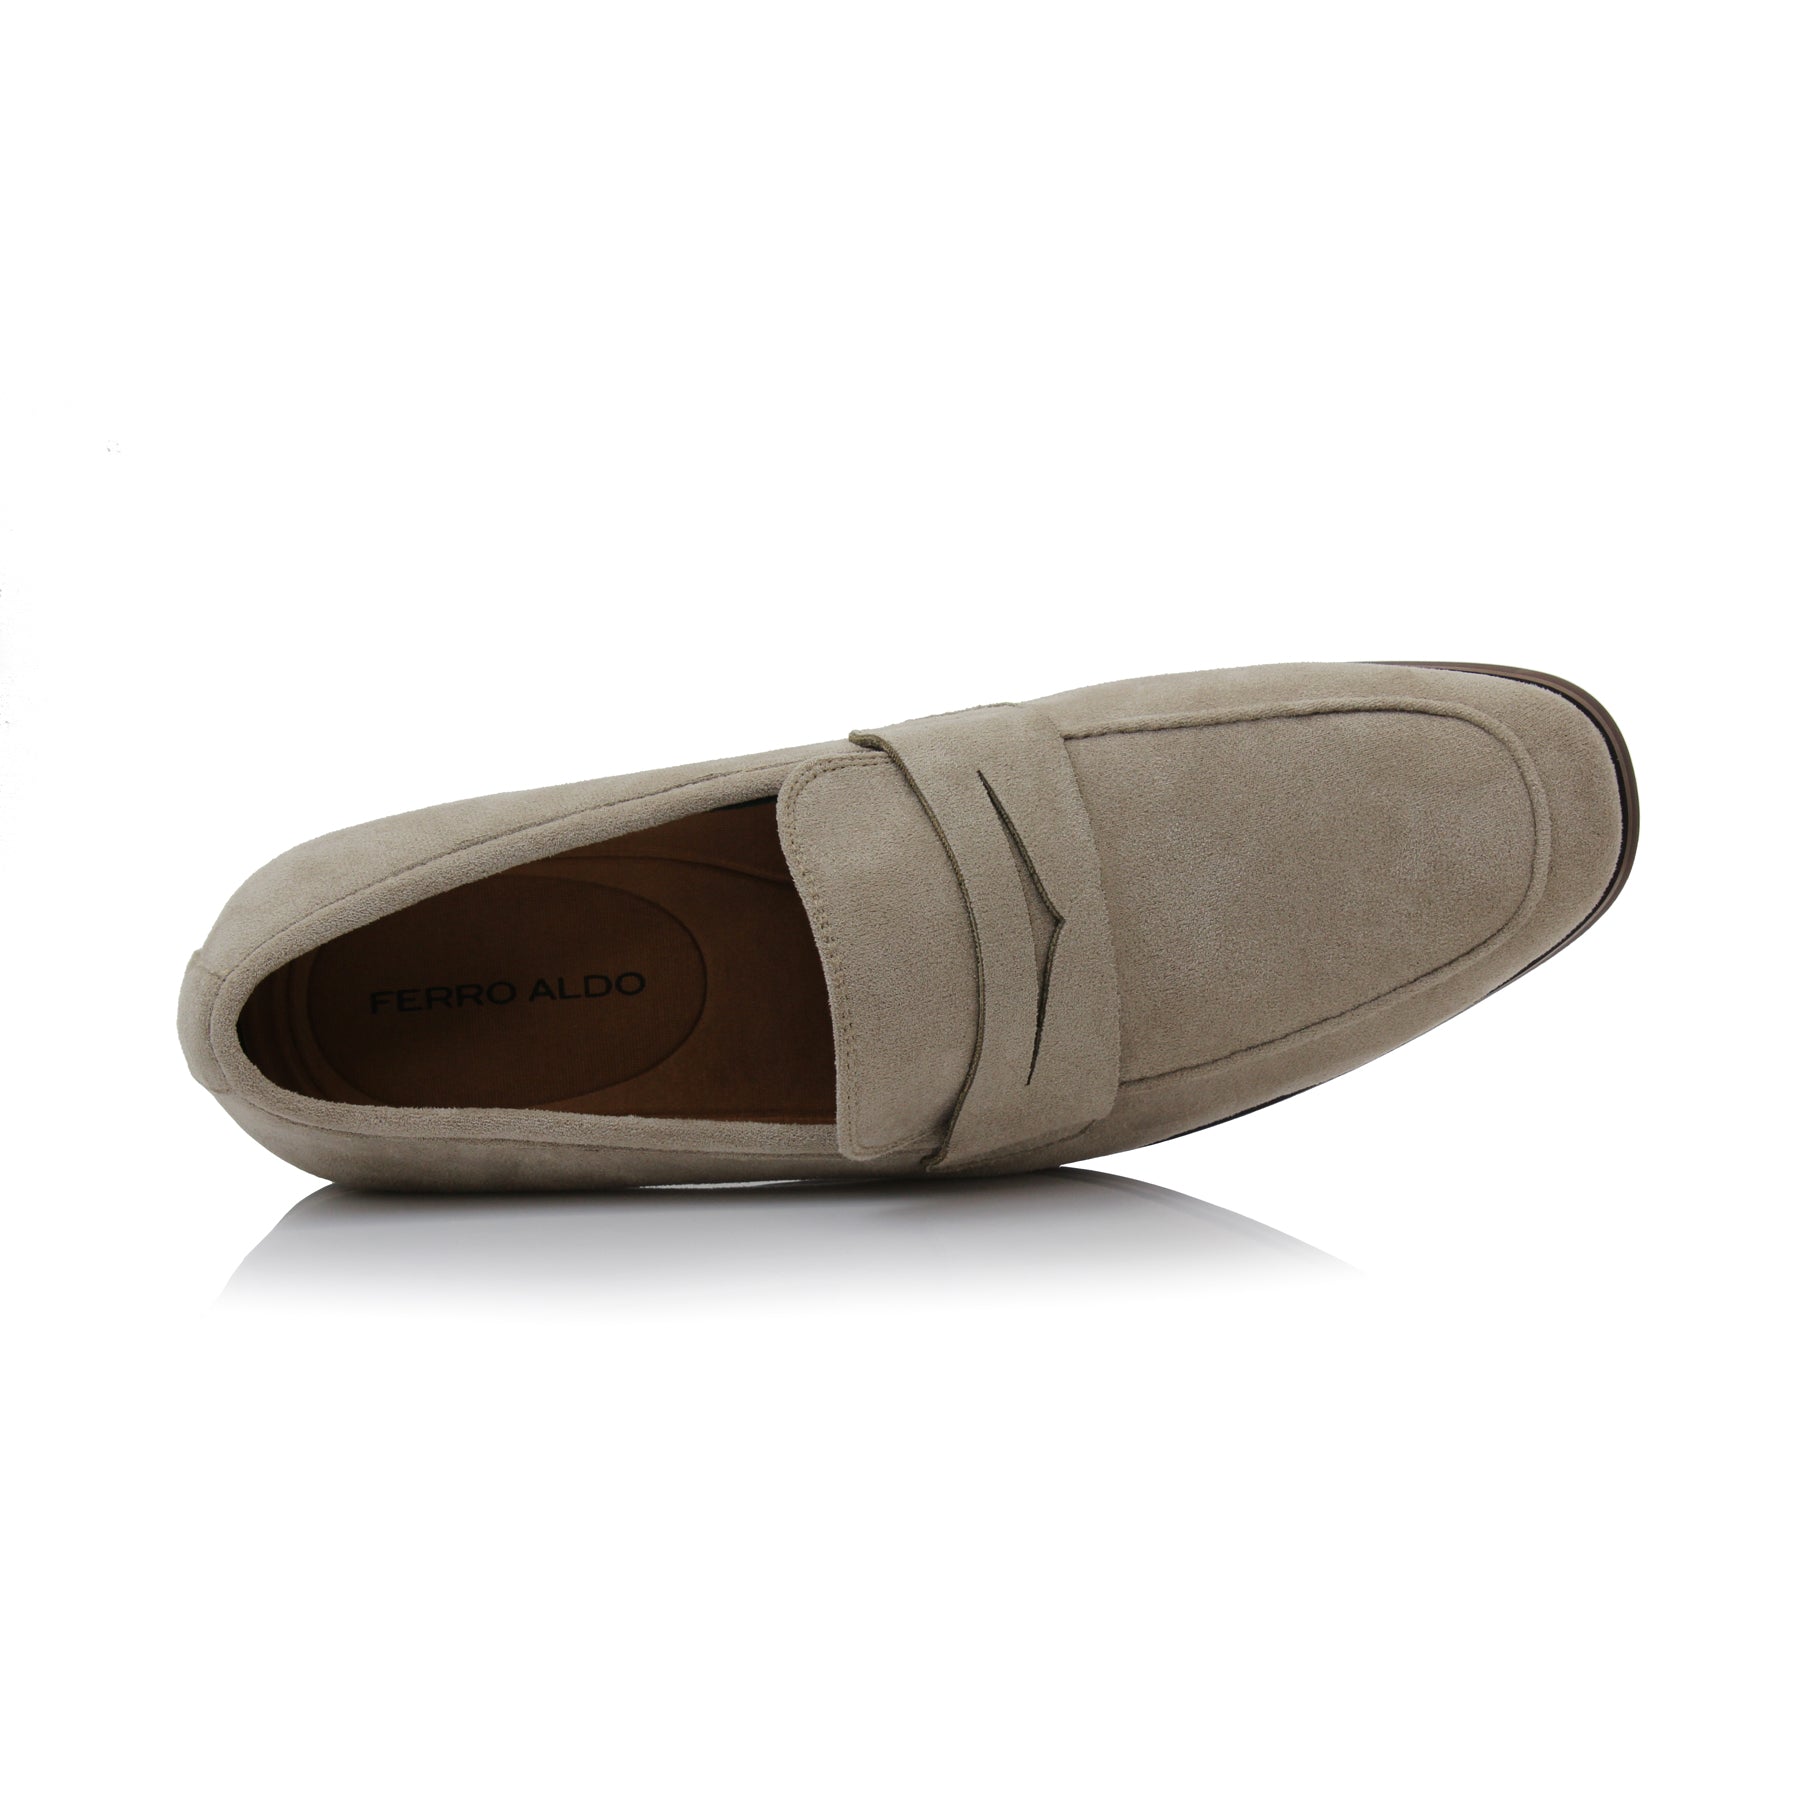 Suede Penny Loafers | Dylan by Ferro Aldo | Conal Footwear | Top-Down Angle View